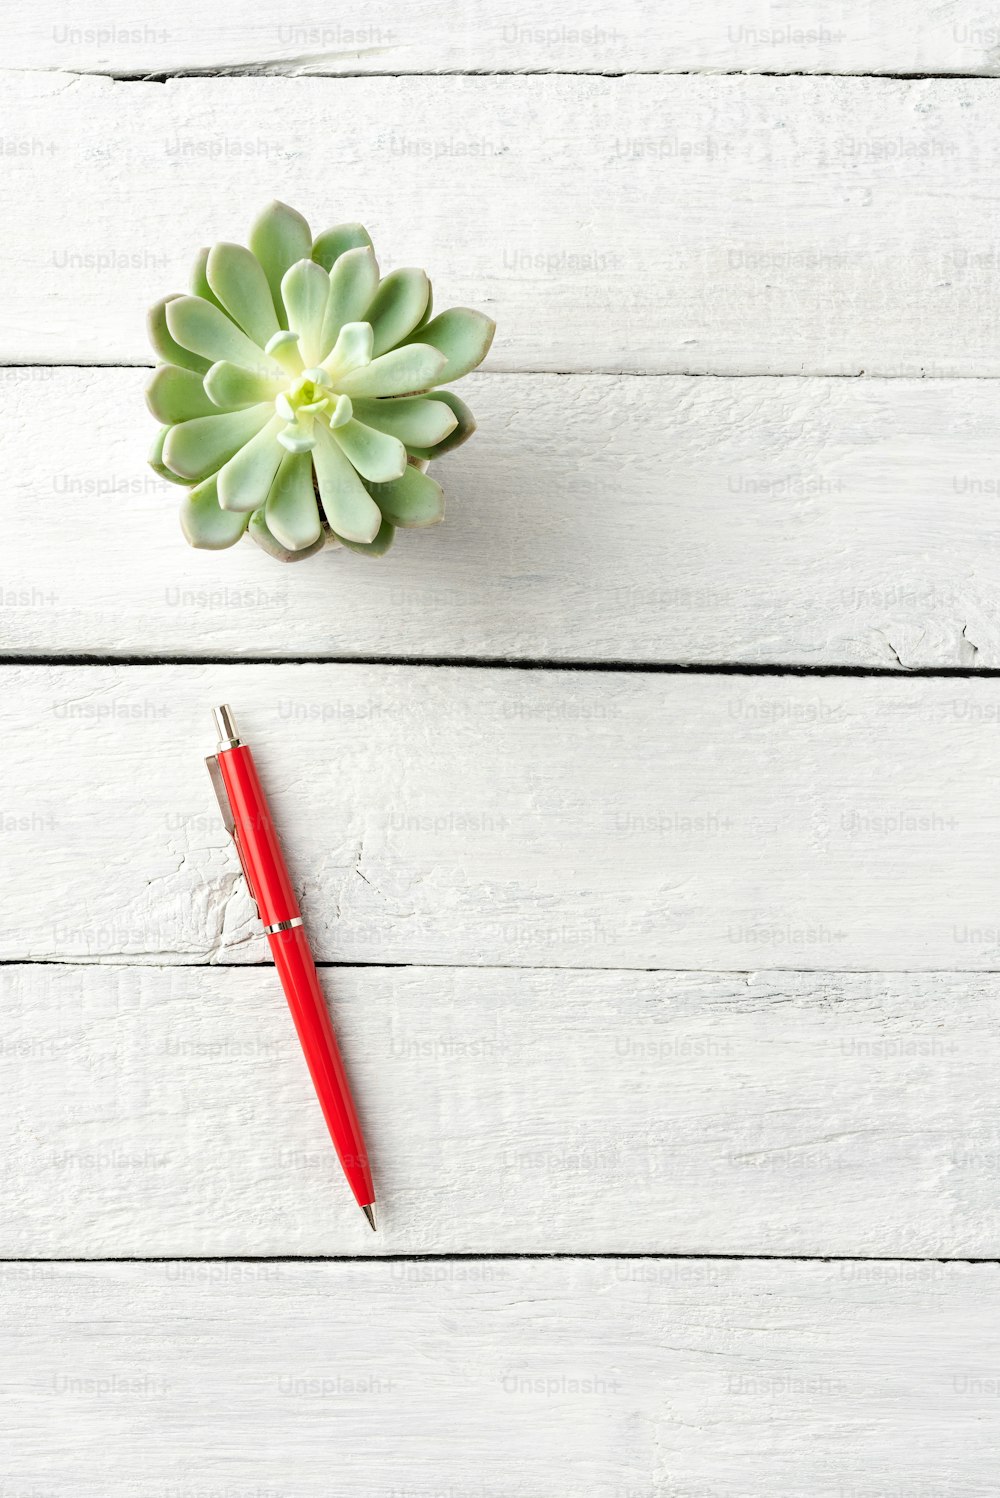 Overhead shot of red pen and small flower on white wooden table with copyspace. Office desktop concept